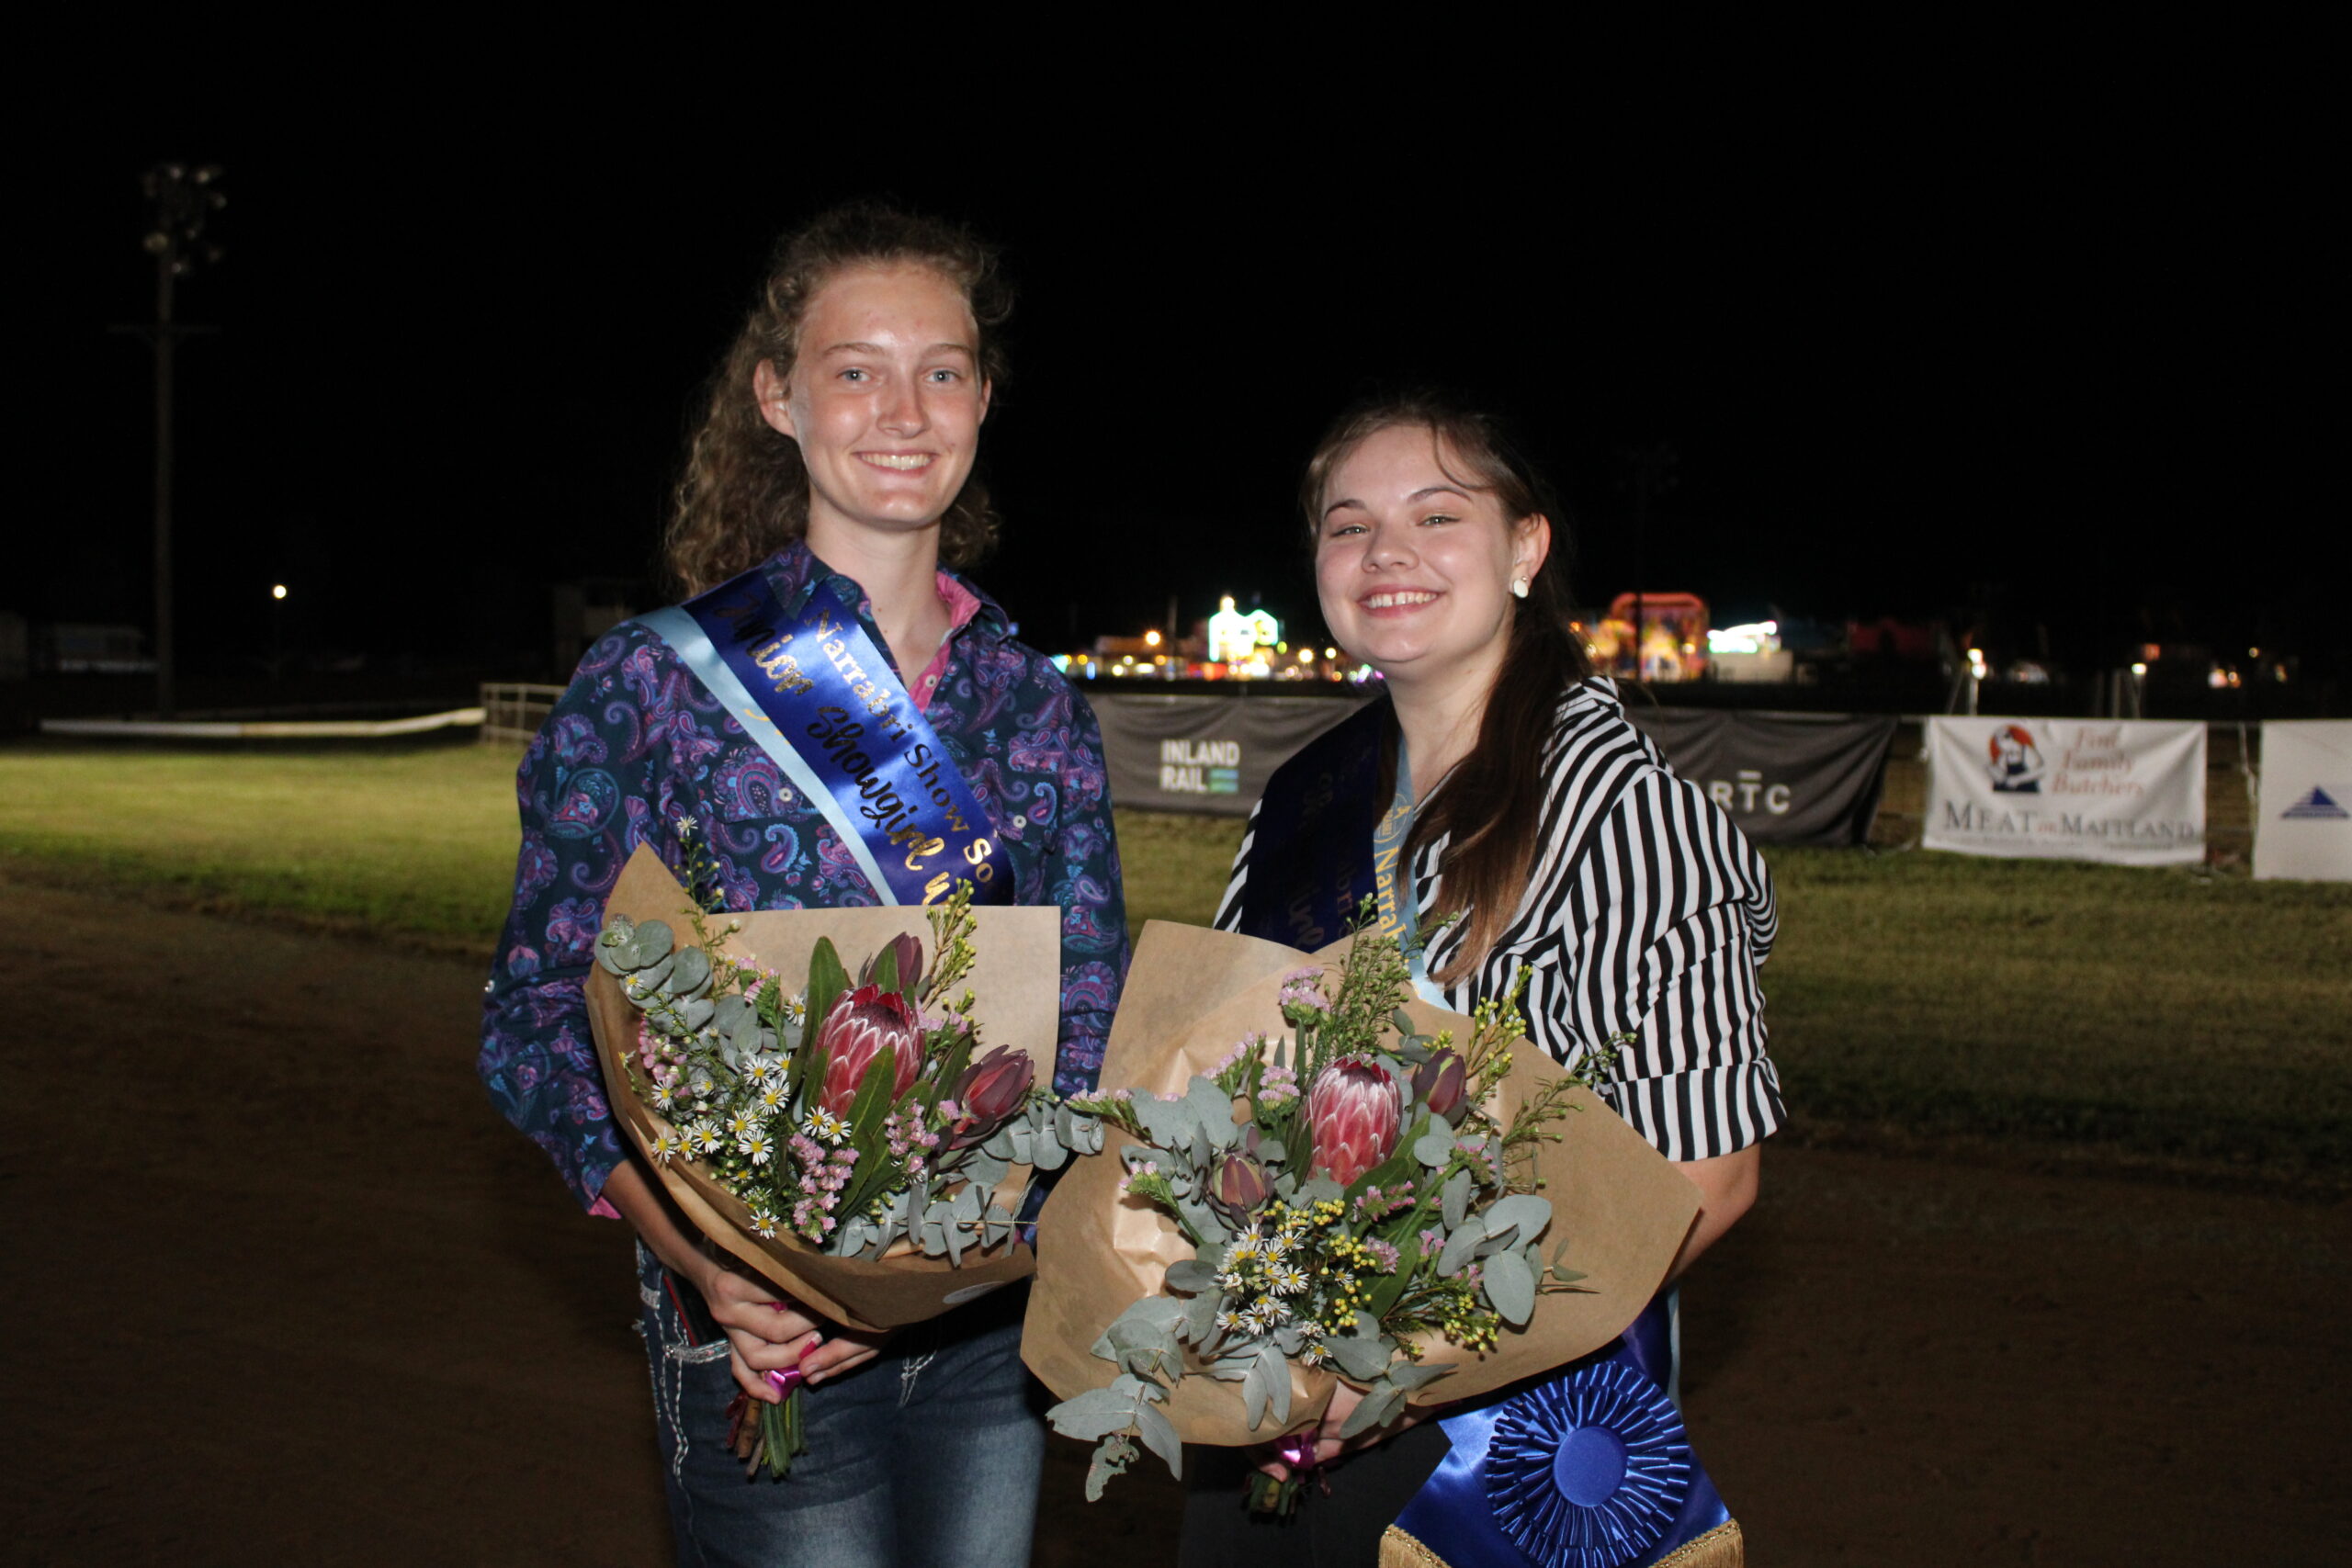 2021 Narrabri Showgirl winners announced at show’s official opening